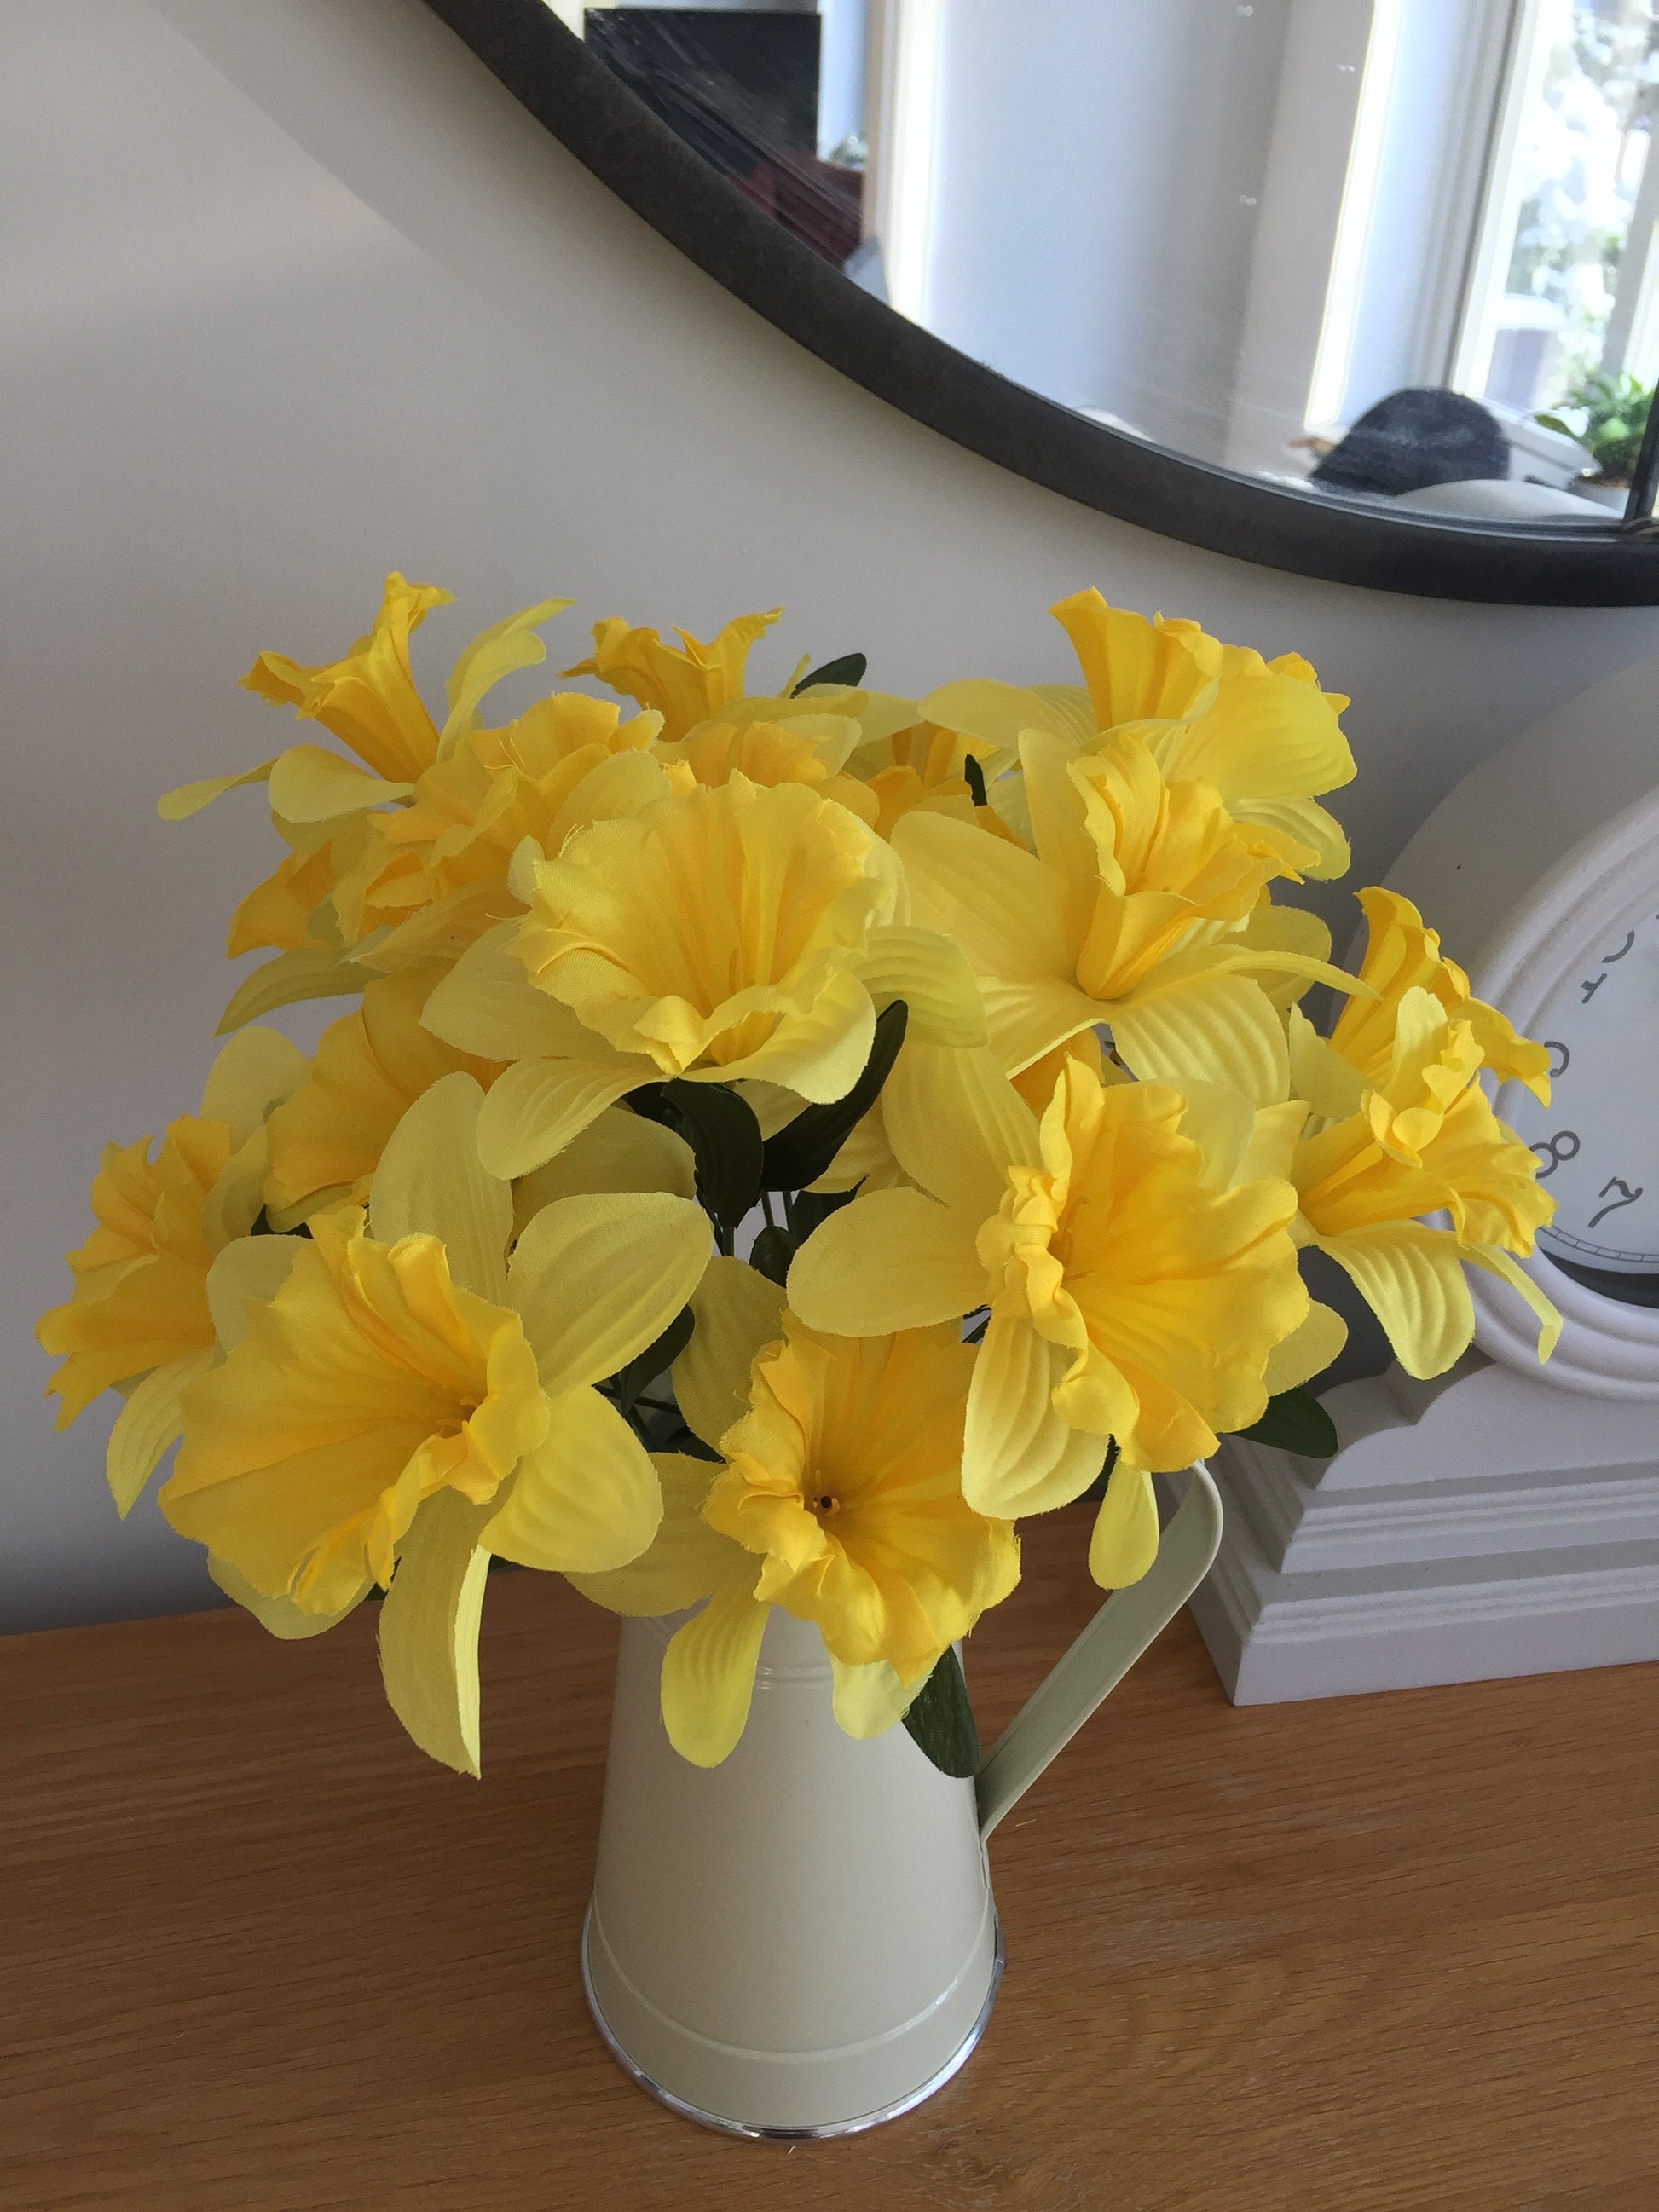 Faux Silk Daffodils 15 wired stems Easter Spring Flowers Free Postage